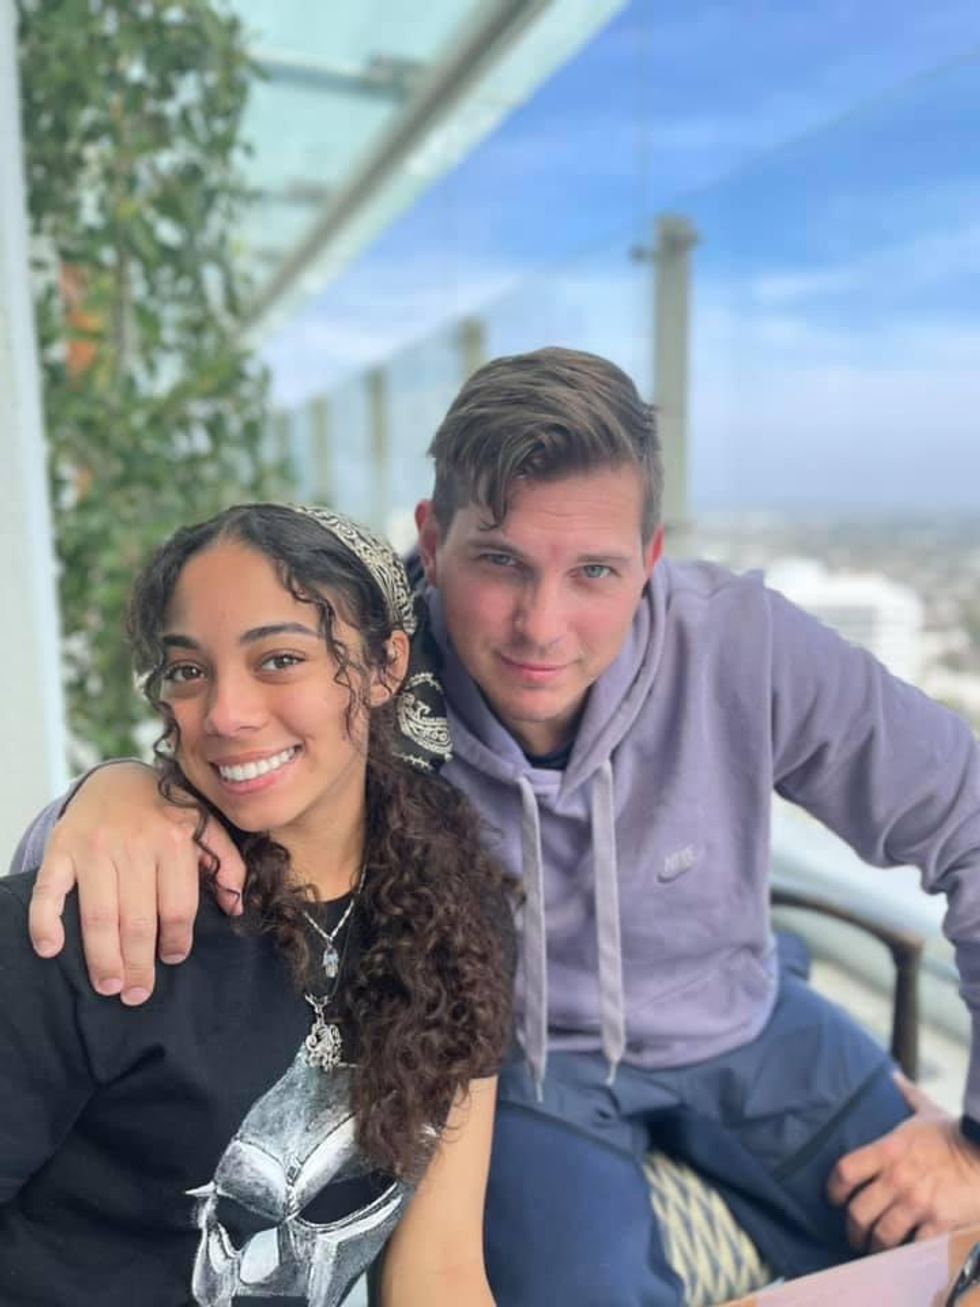 unbiased entertainment news source, dance, follow News Without Politics, Father–Daughter Duo Is Choreographing a New Netflix Show, subscribe to News Without Politics